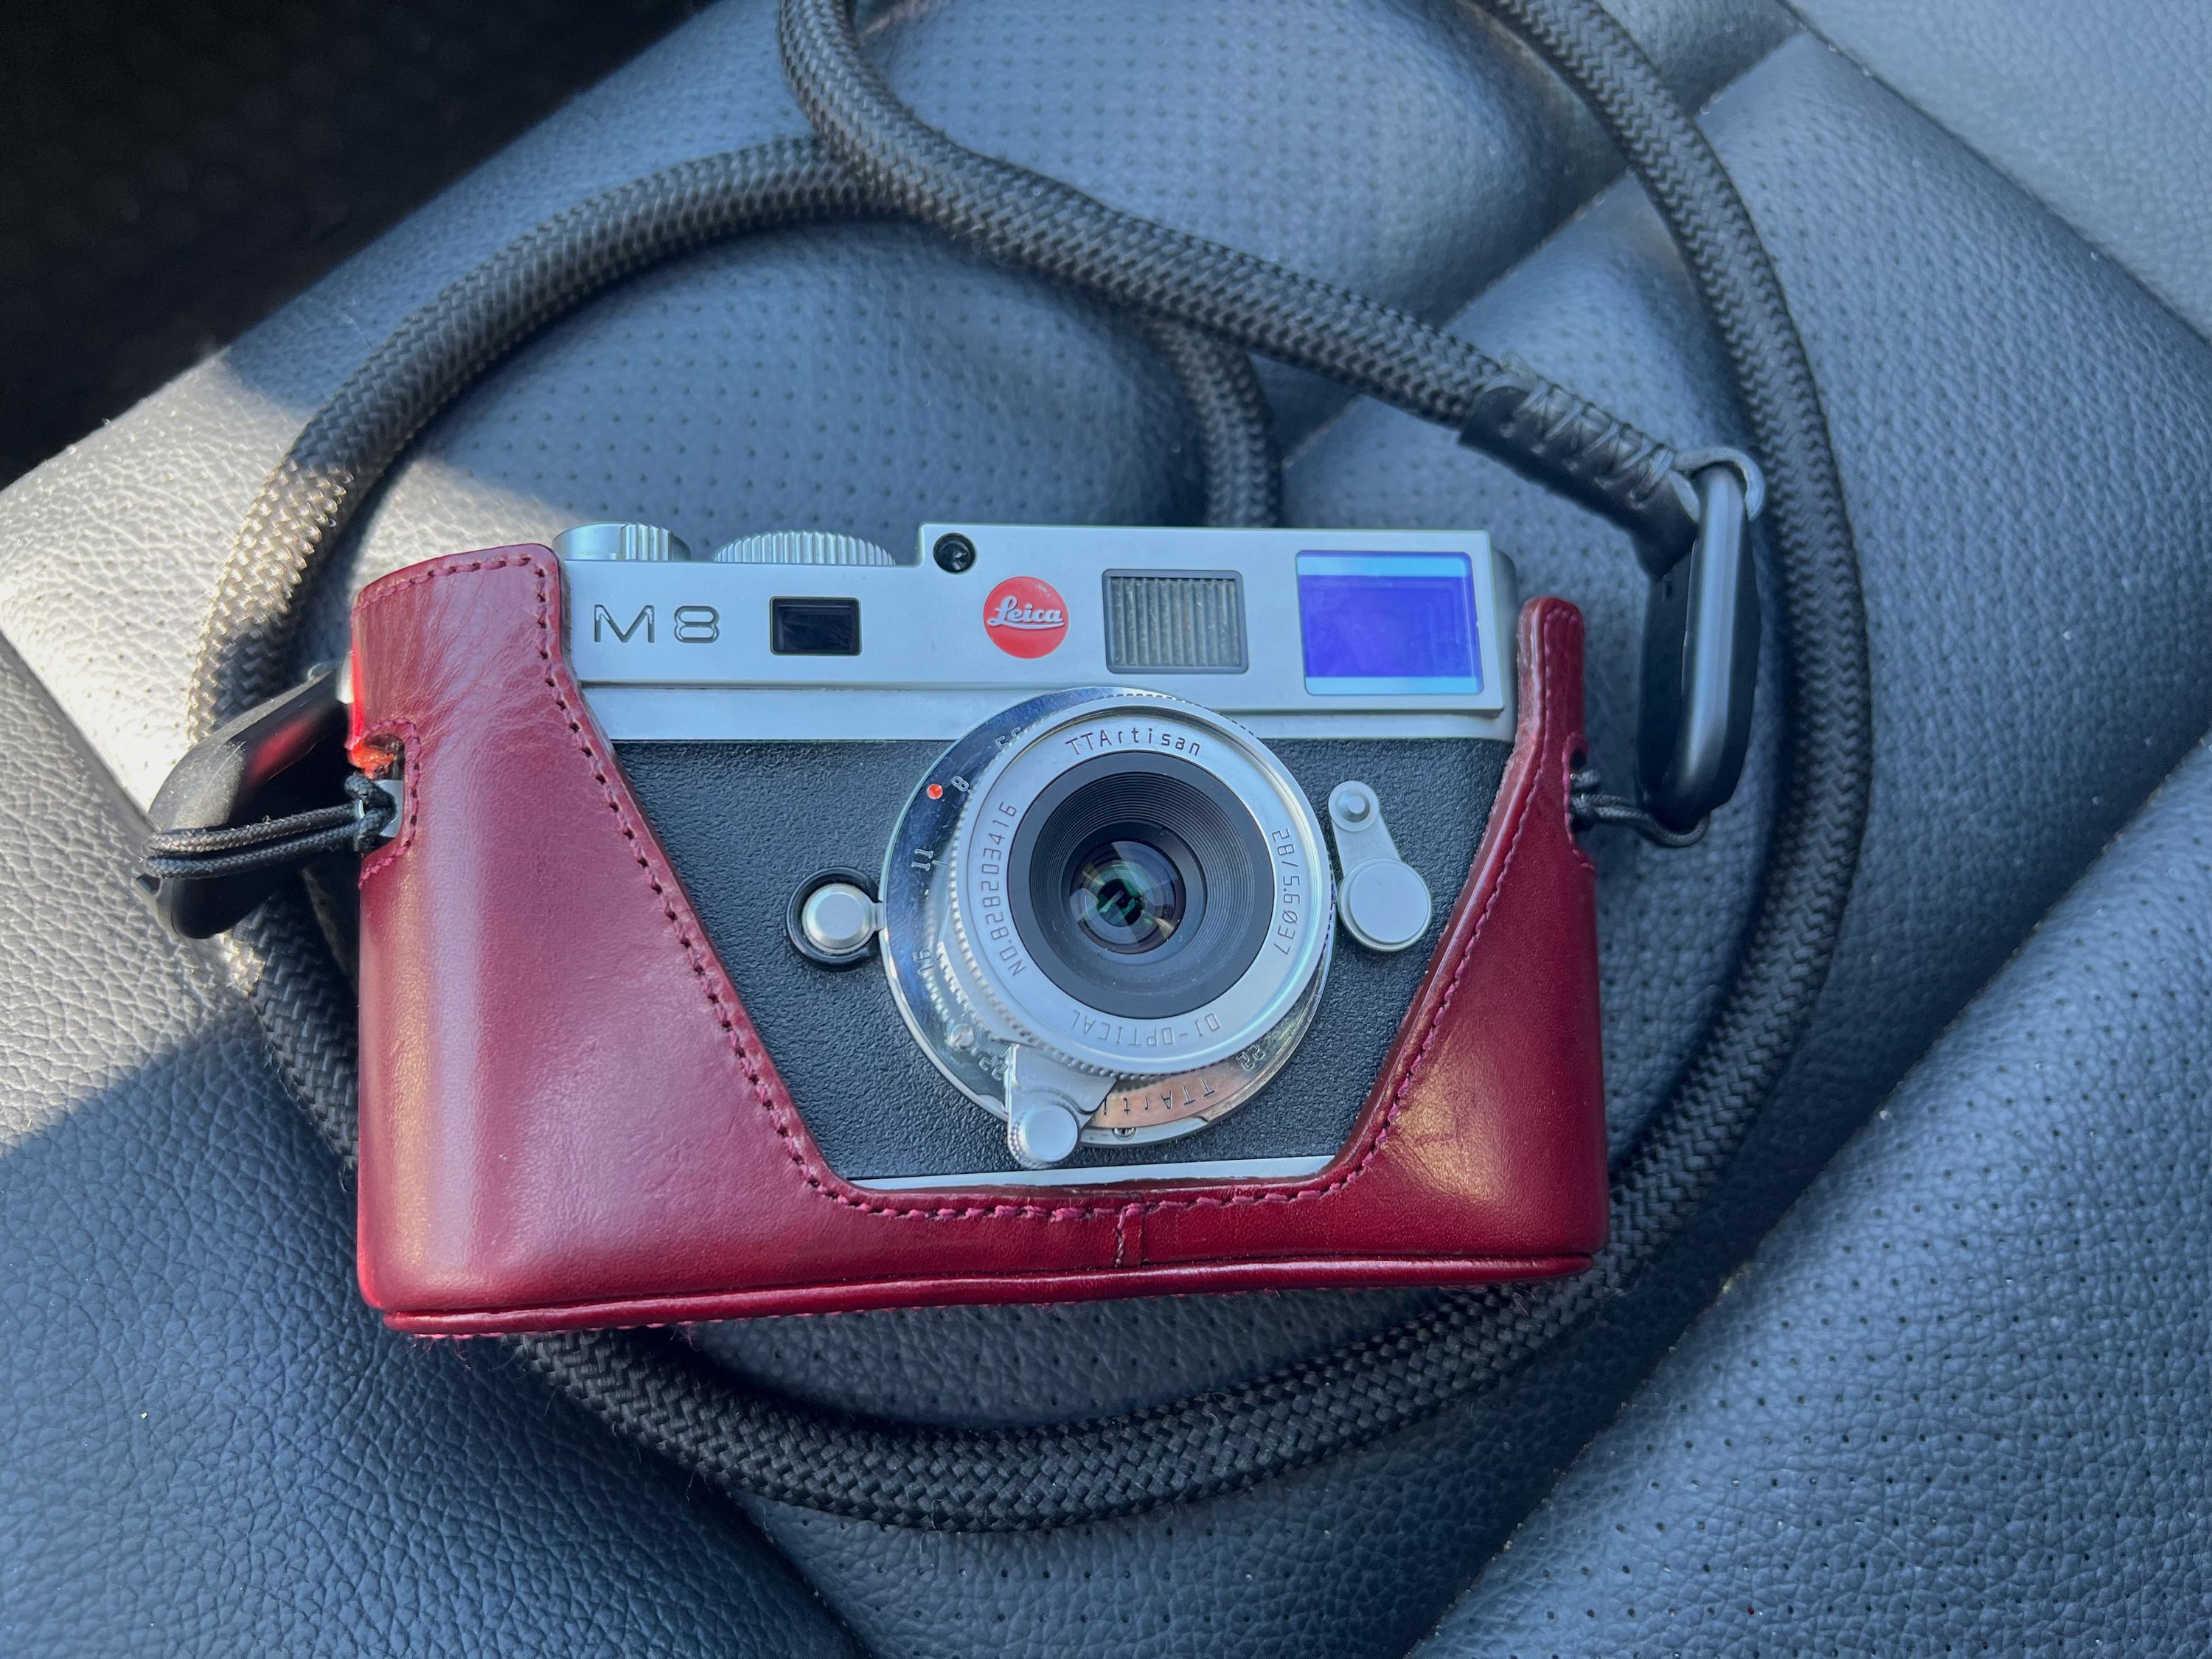 My beloved, if somewhat neglected Leica M8